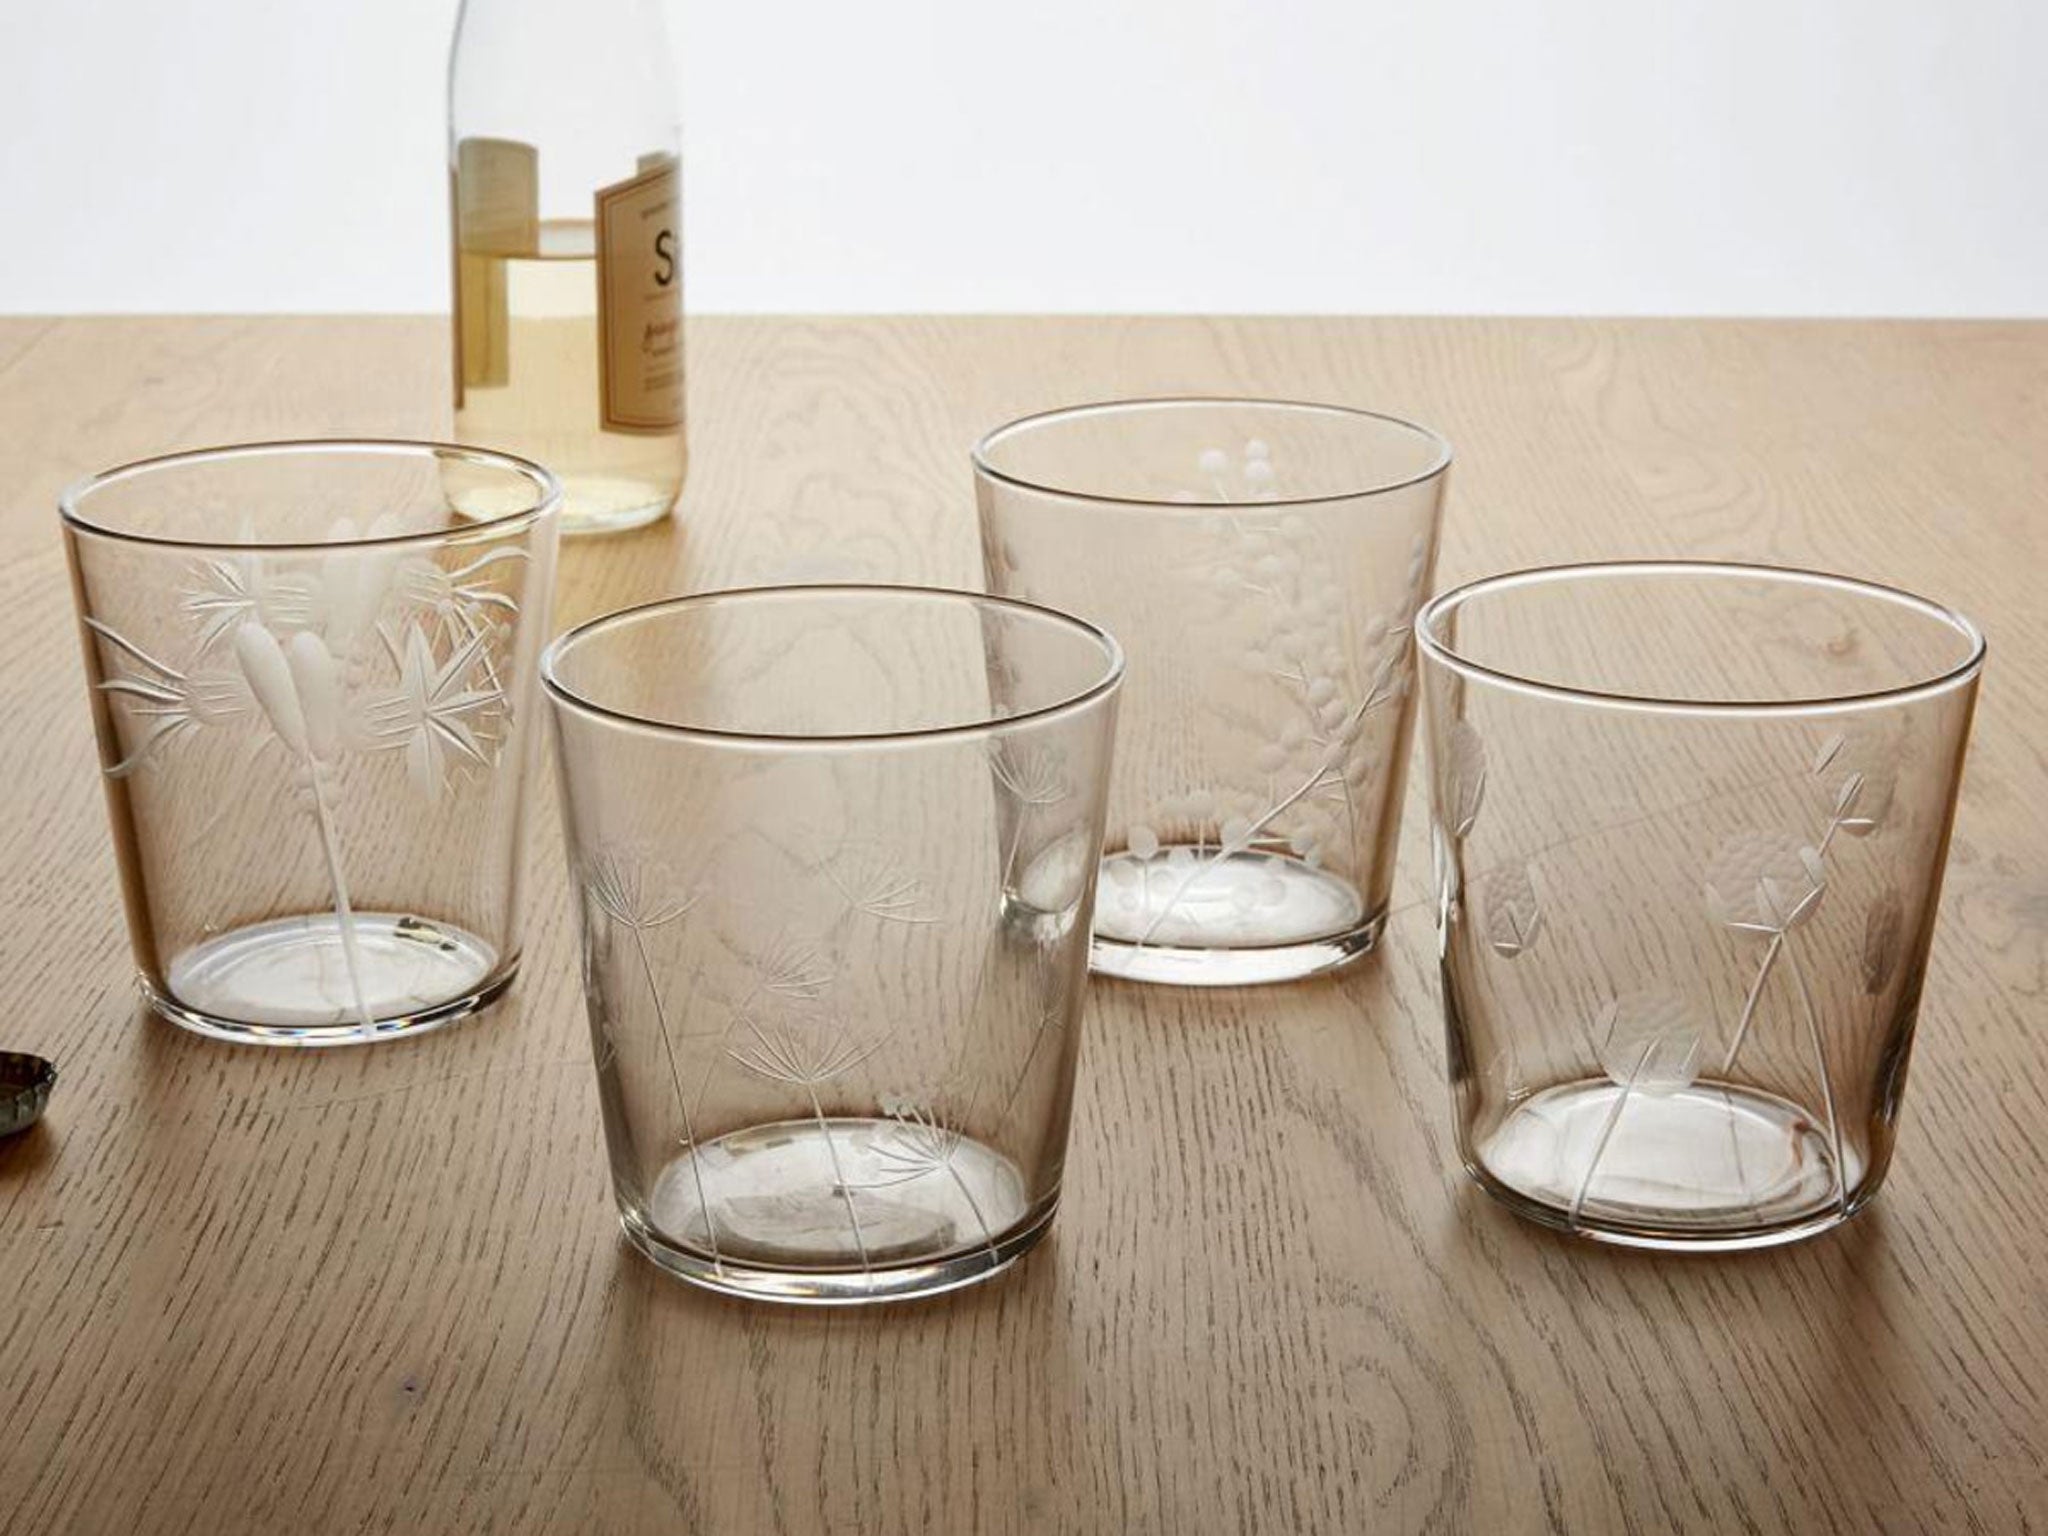 10 Designer Tumblers And Bottle Holders To Drink In Style